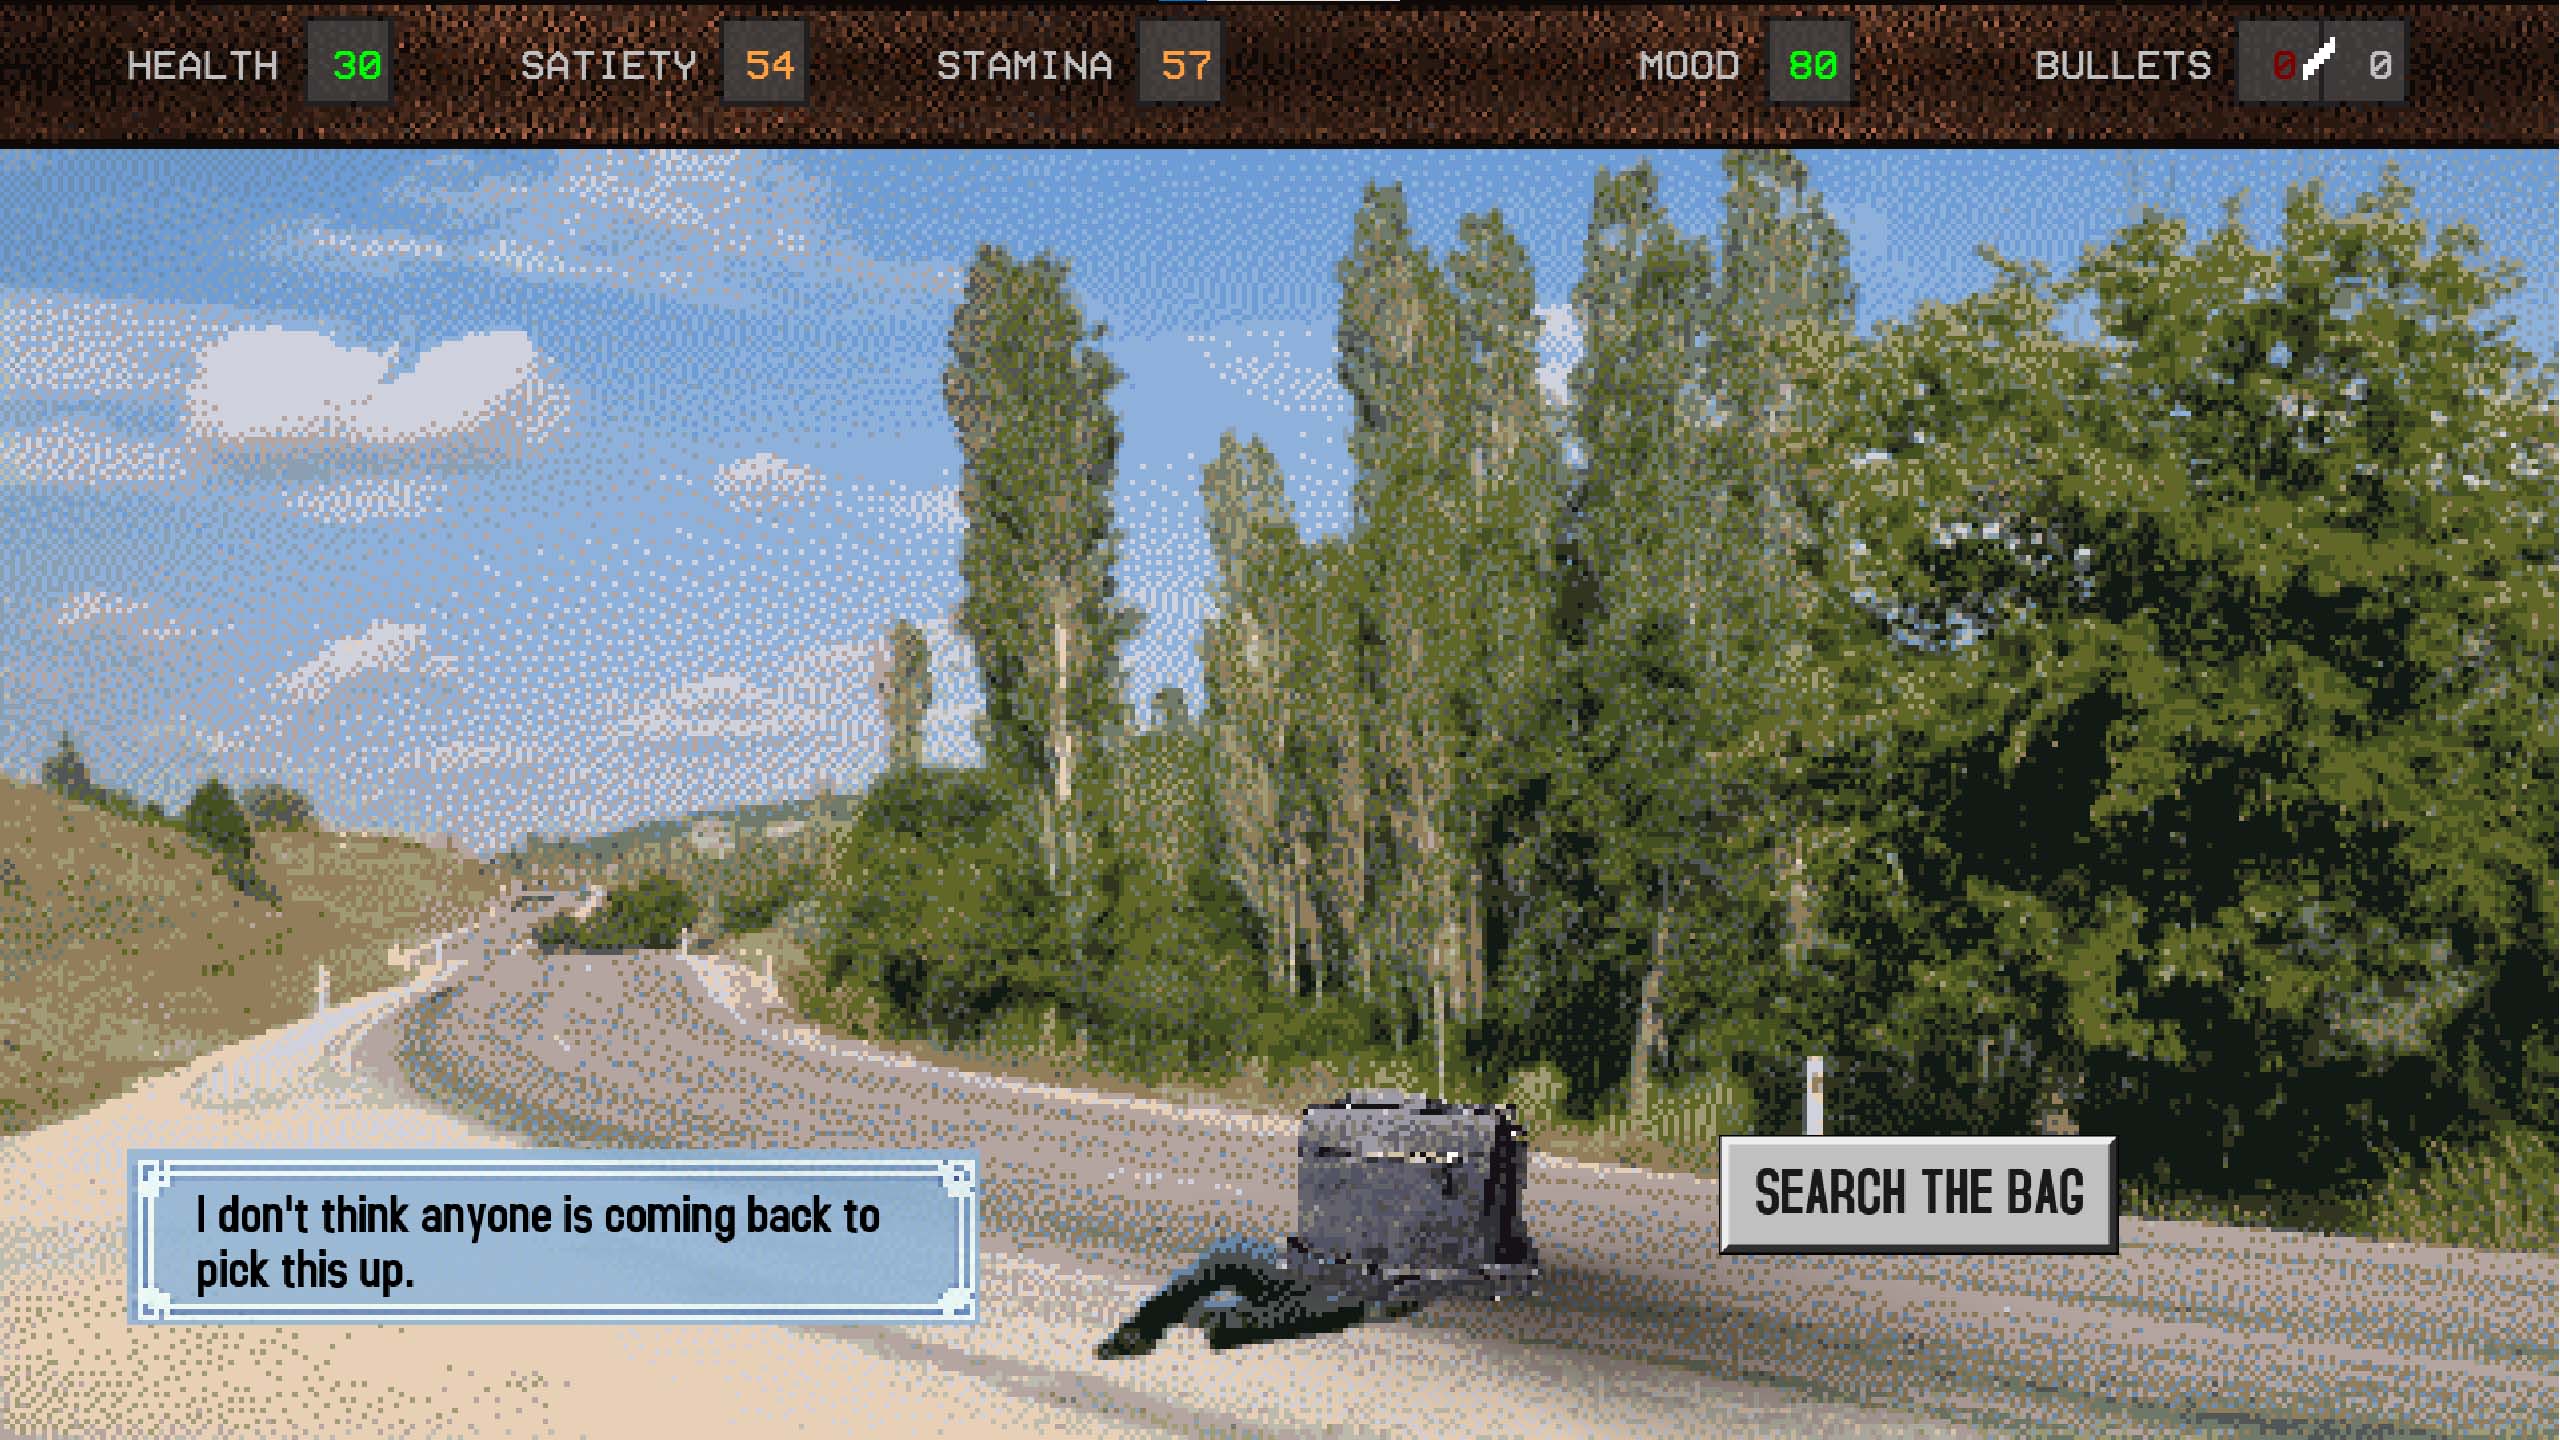 gameplay screenshot - dead man with bag by side of road